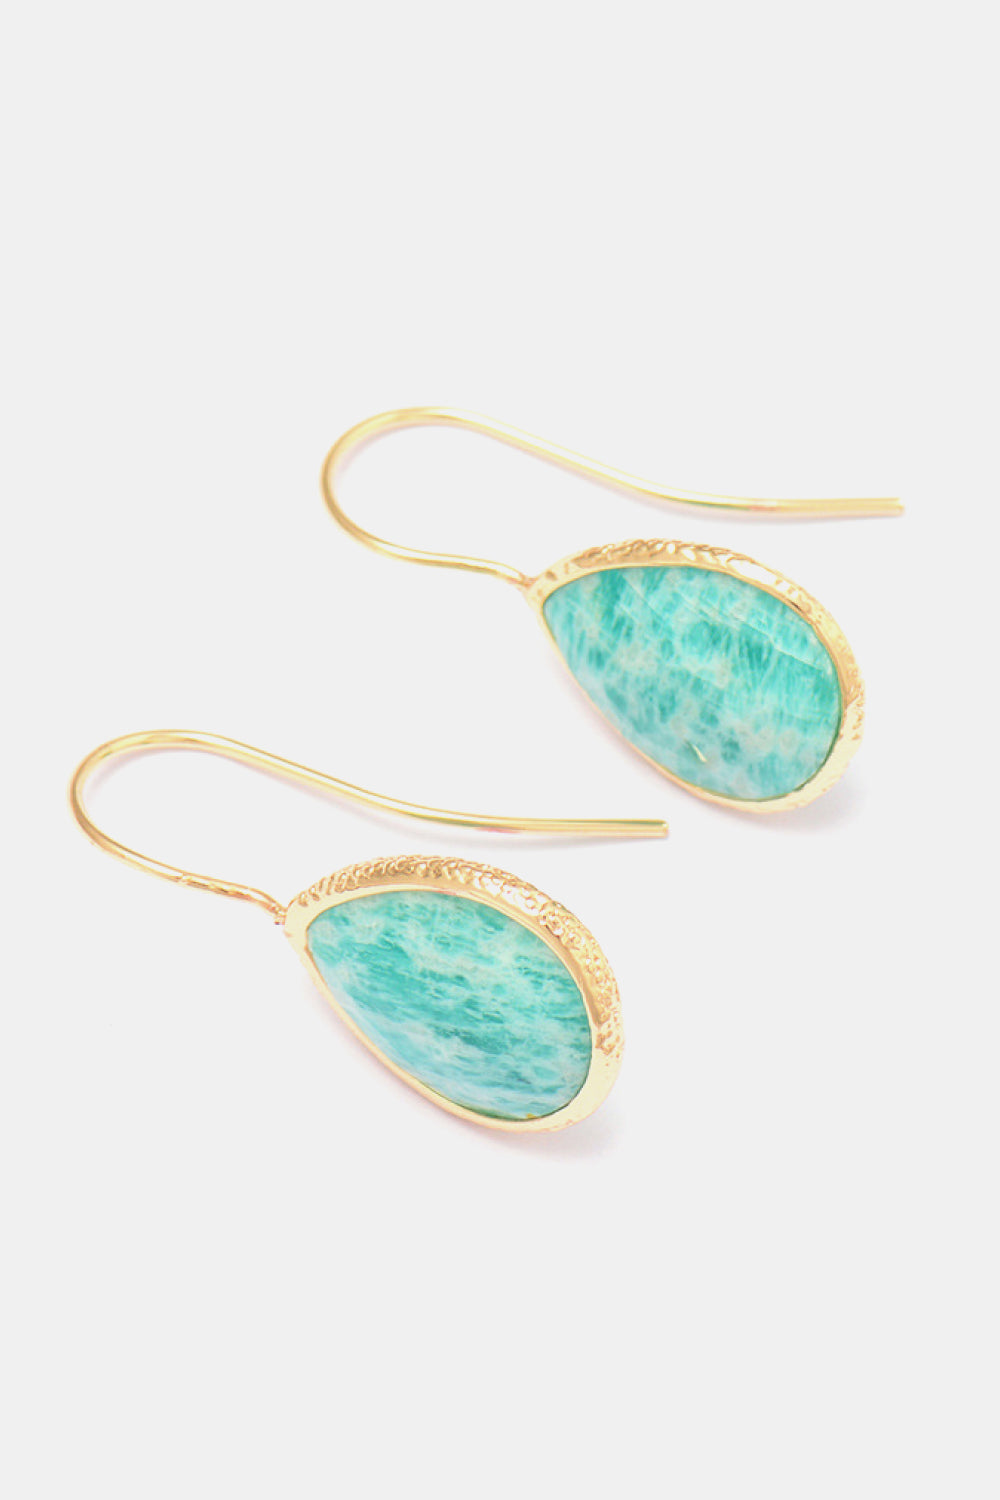 Handmade Natural Stone Teardrop Earrings Available in Multiple Colors